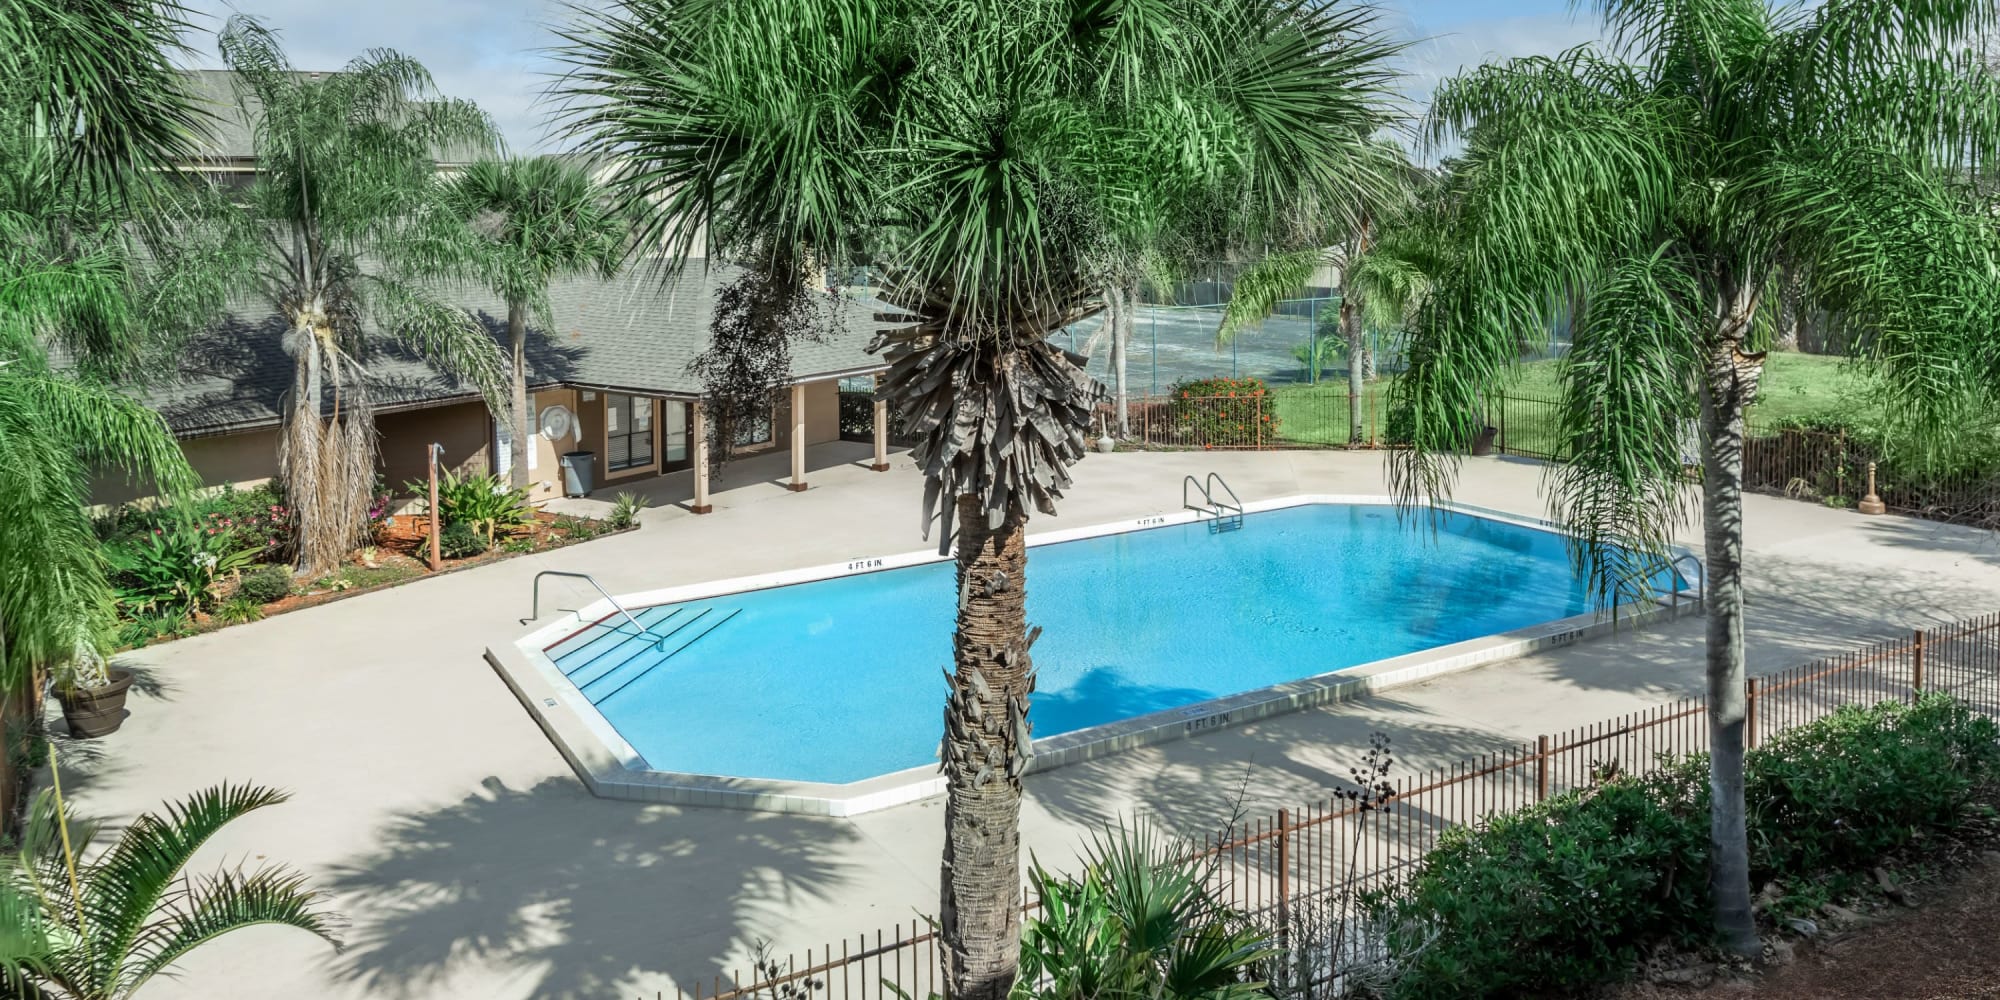 Pool surrounded by palm trees at The Cascades at Kissimmee in Kissimmee, Florida